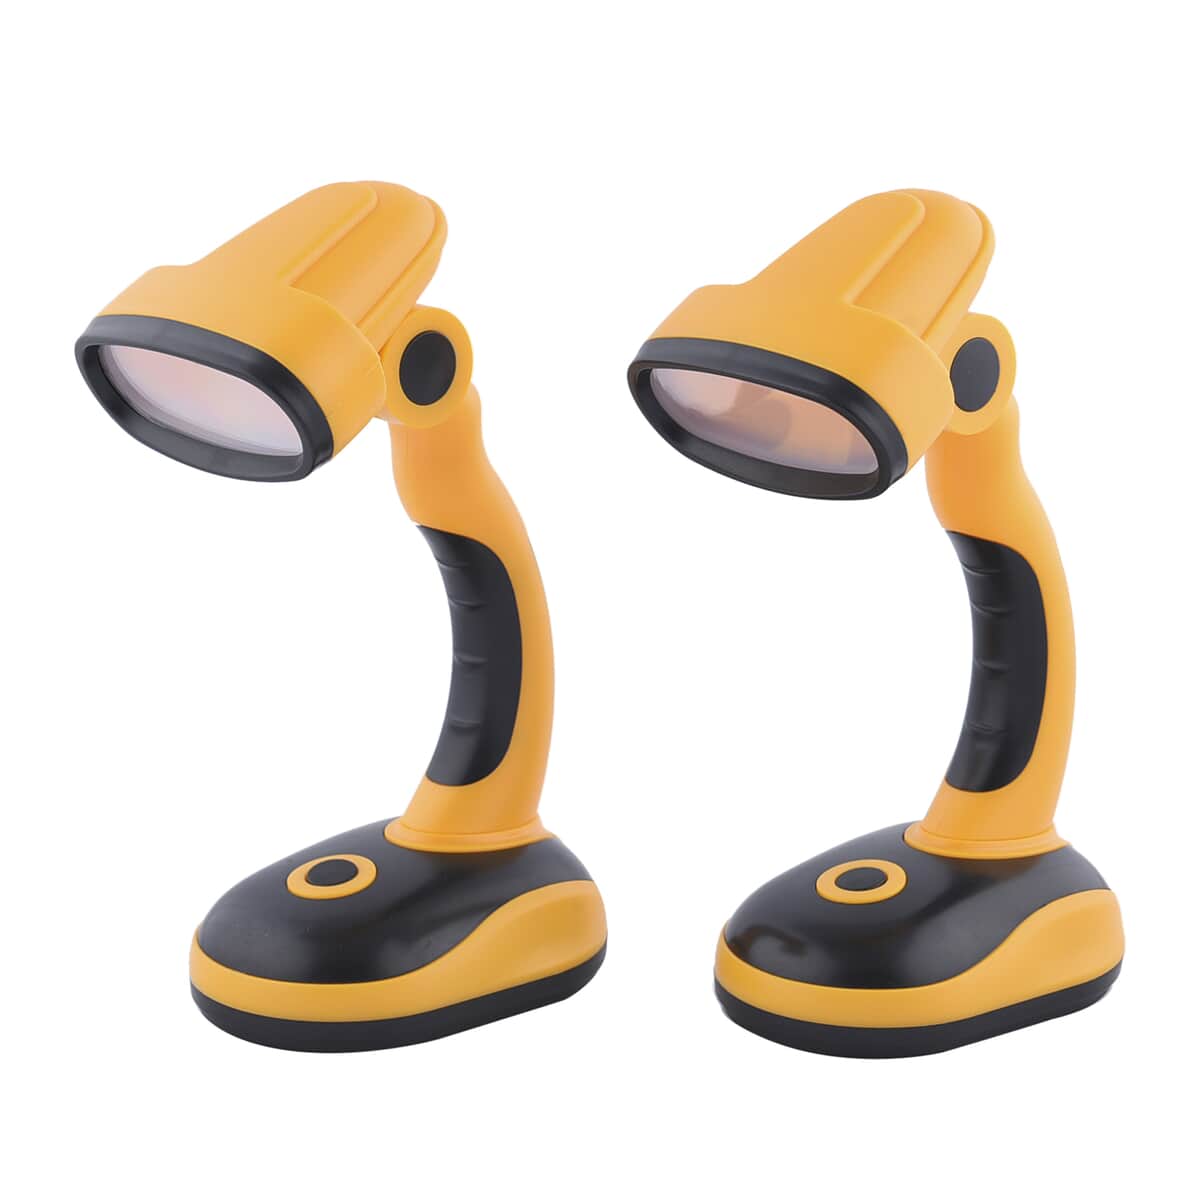 Homesmart Set of 2 Flexible Desk LED Light Lamp - Yellow (3xAA Batteries Not Included) image number 0